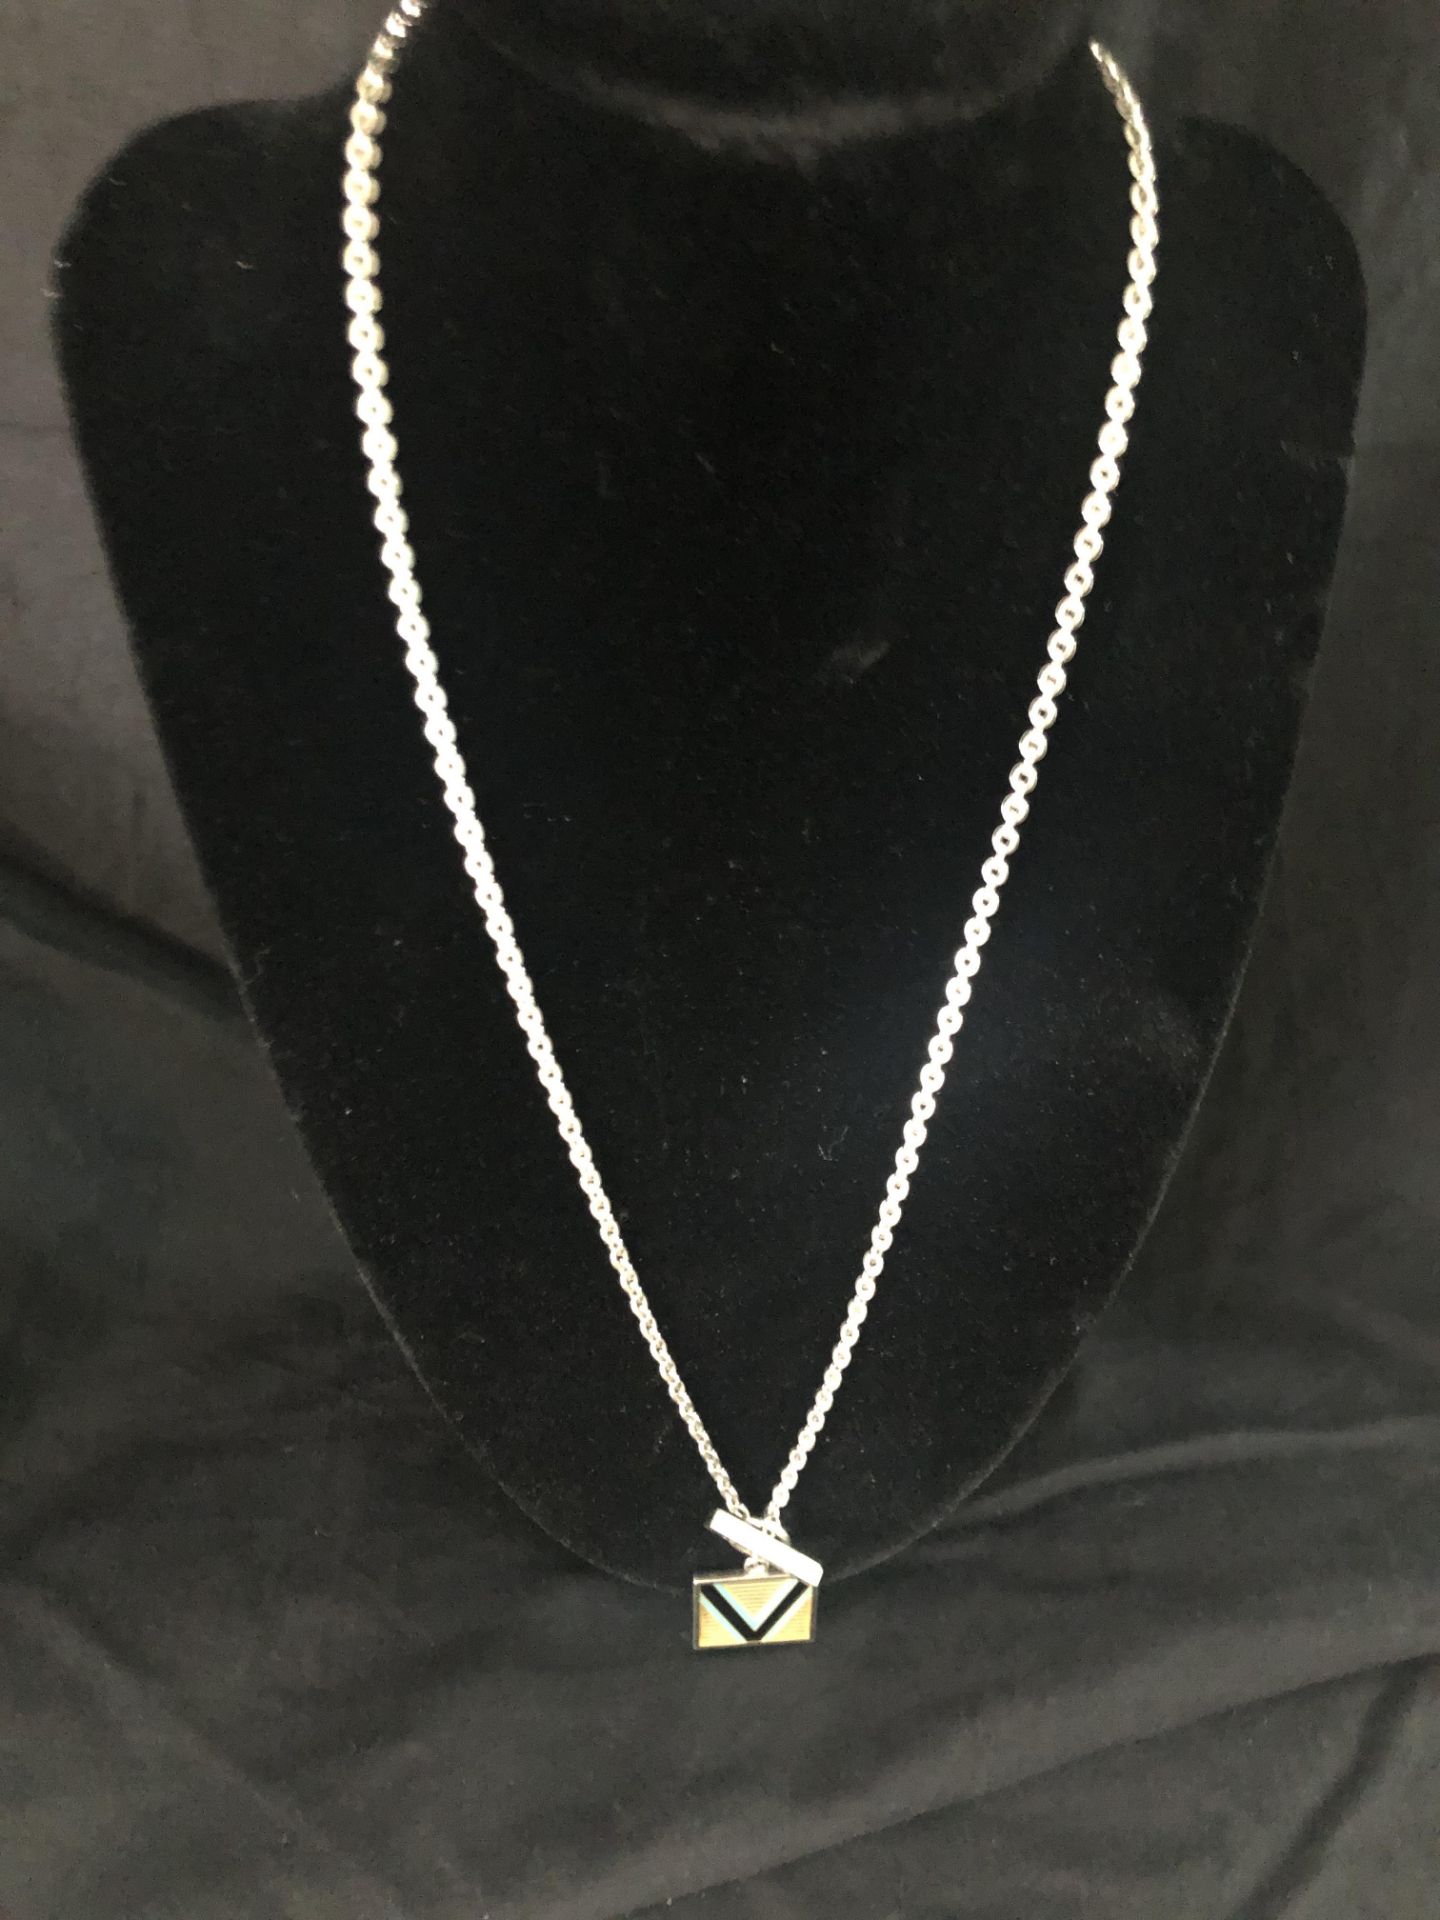 70's Vintage Louis Vuitton Silver Necklace with V Pendant - Image 2 of 2